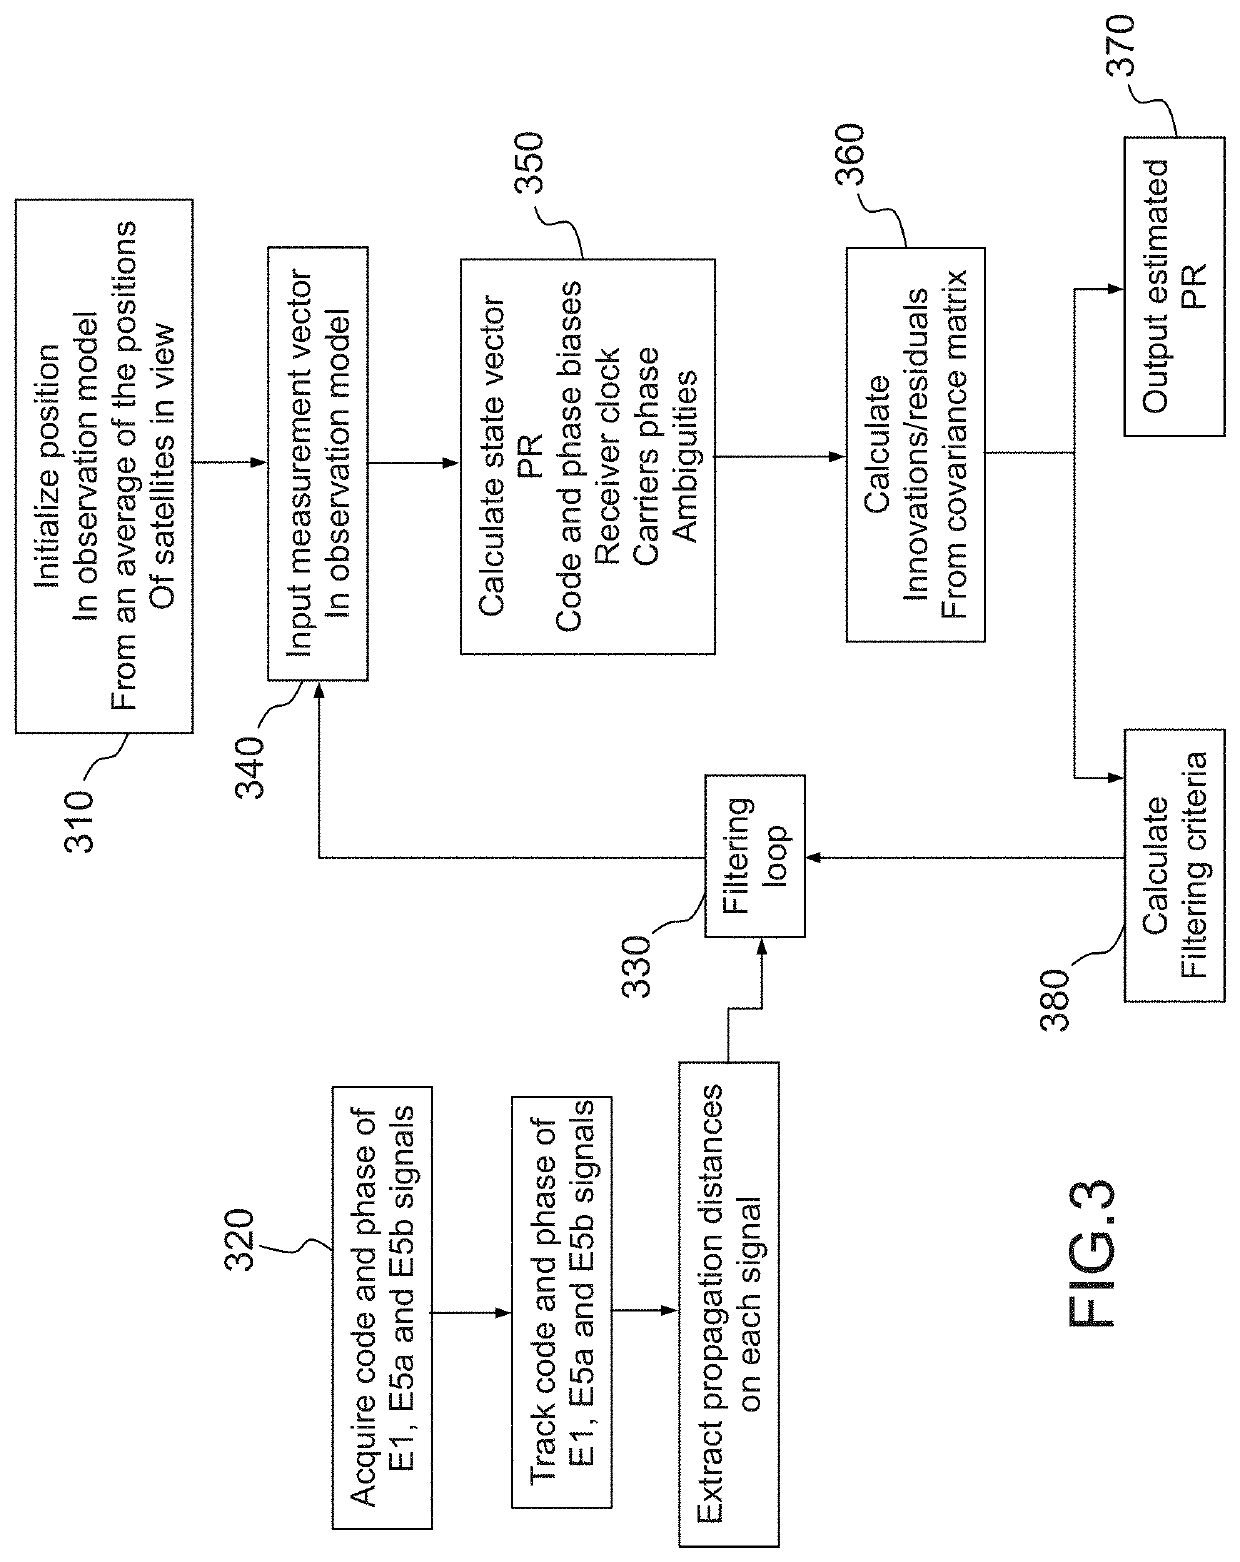 GNSS receiver with a capability to resolve ambiguities using an uncombined formulation